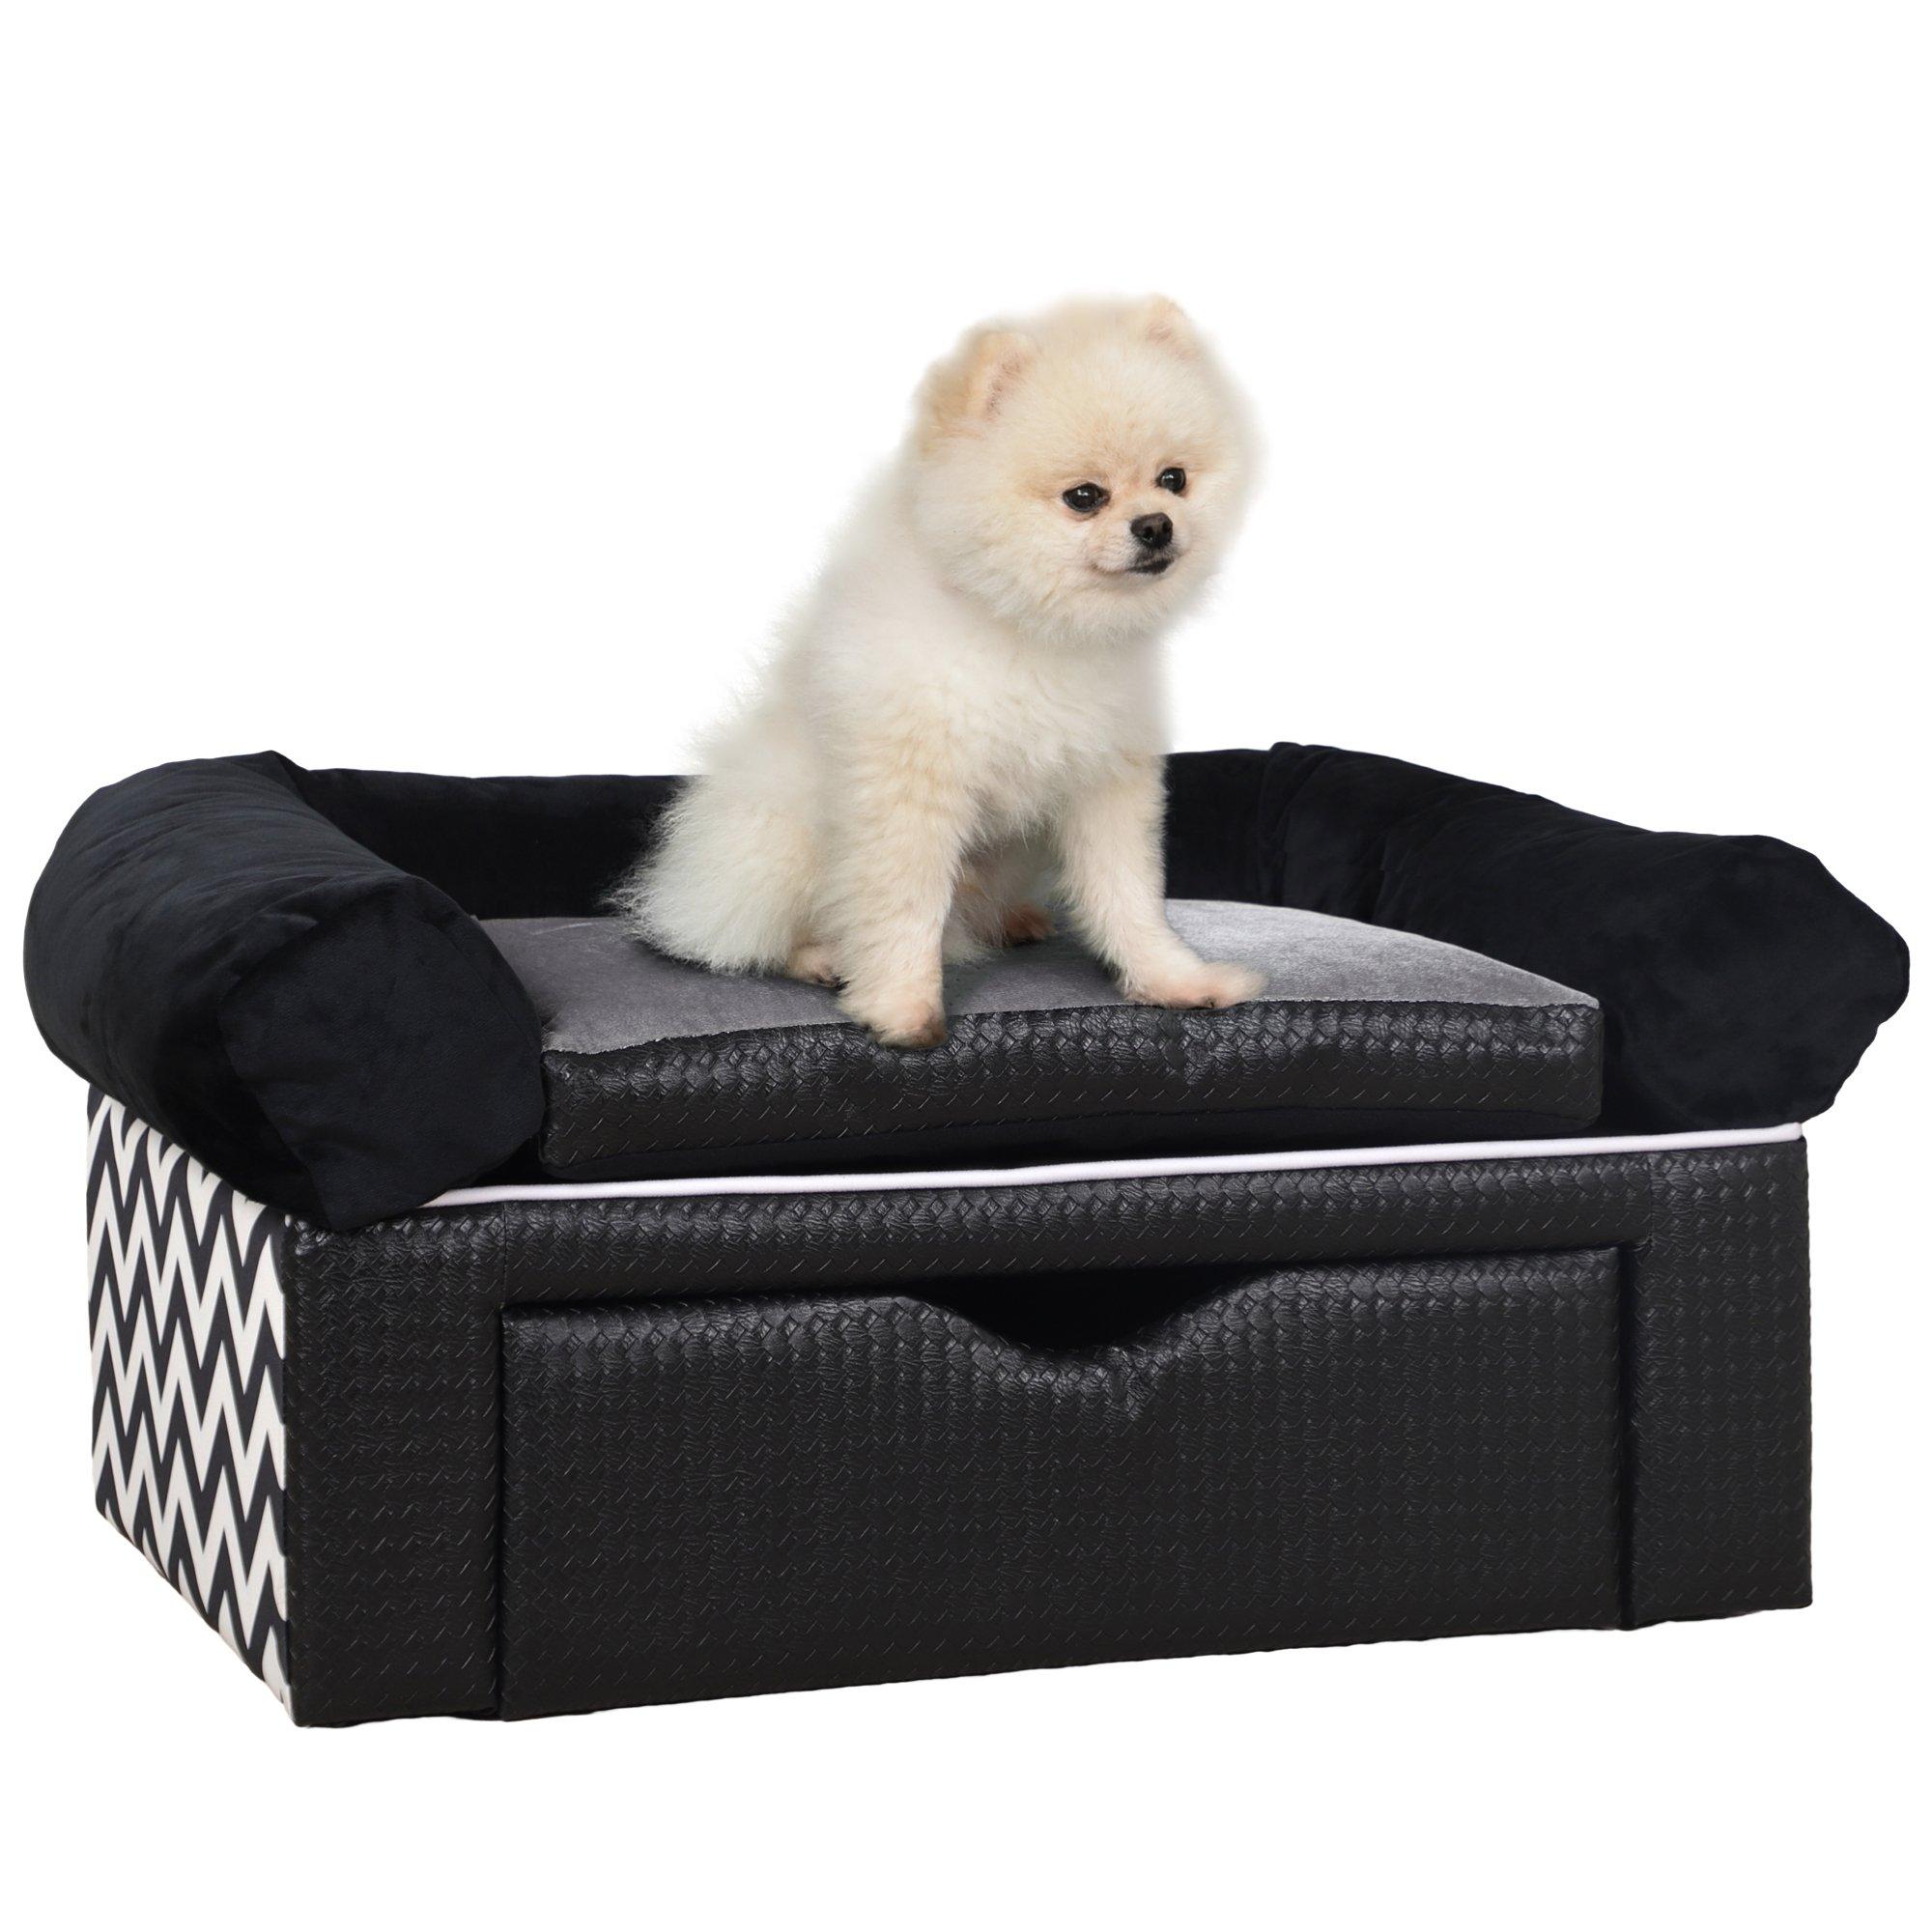 Elevated Dog Couch for Small Dogs with Storage Drawer and Cushion